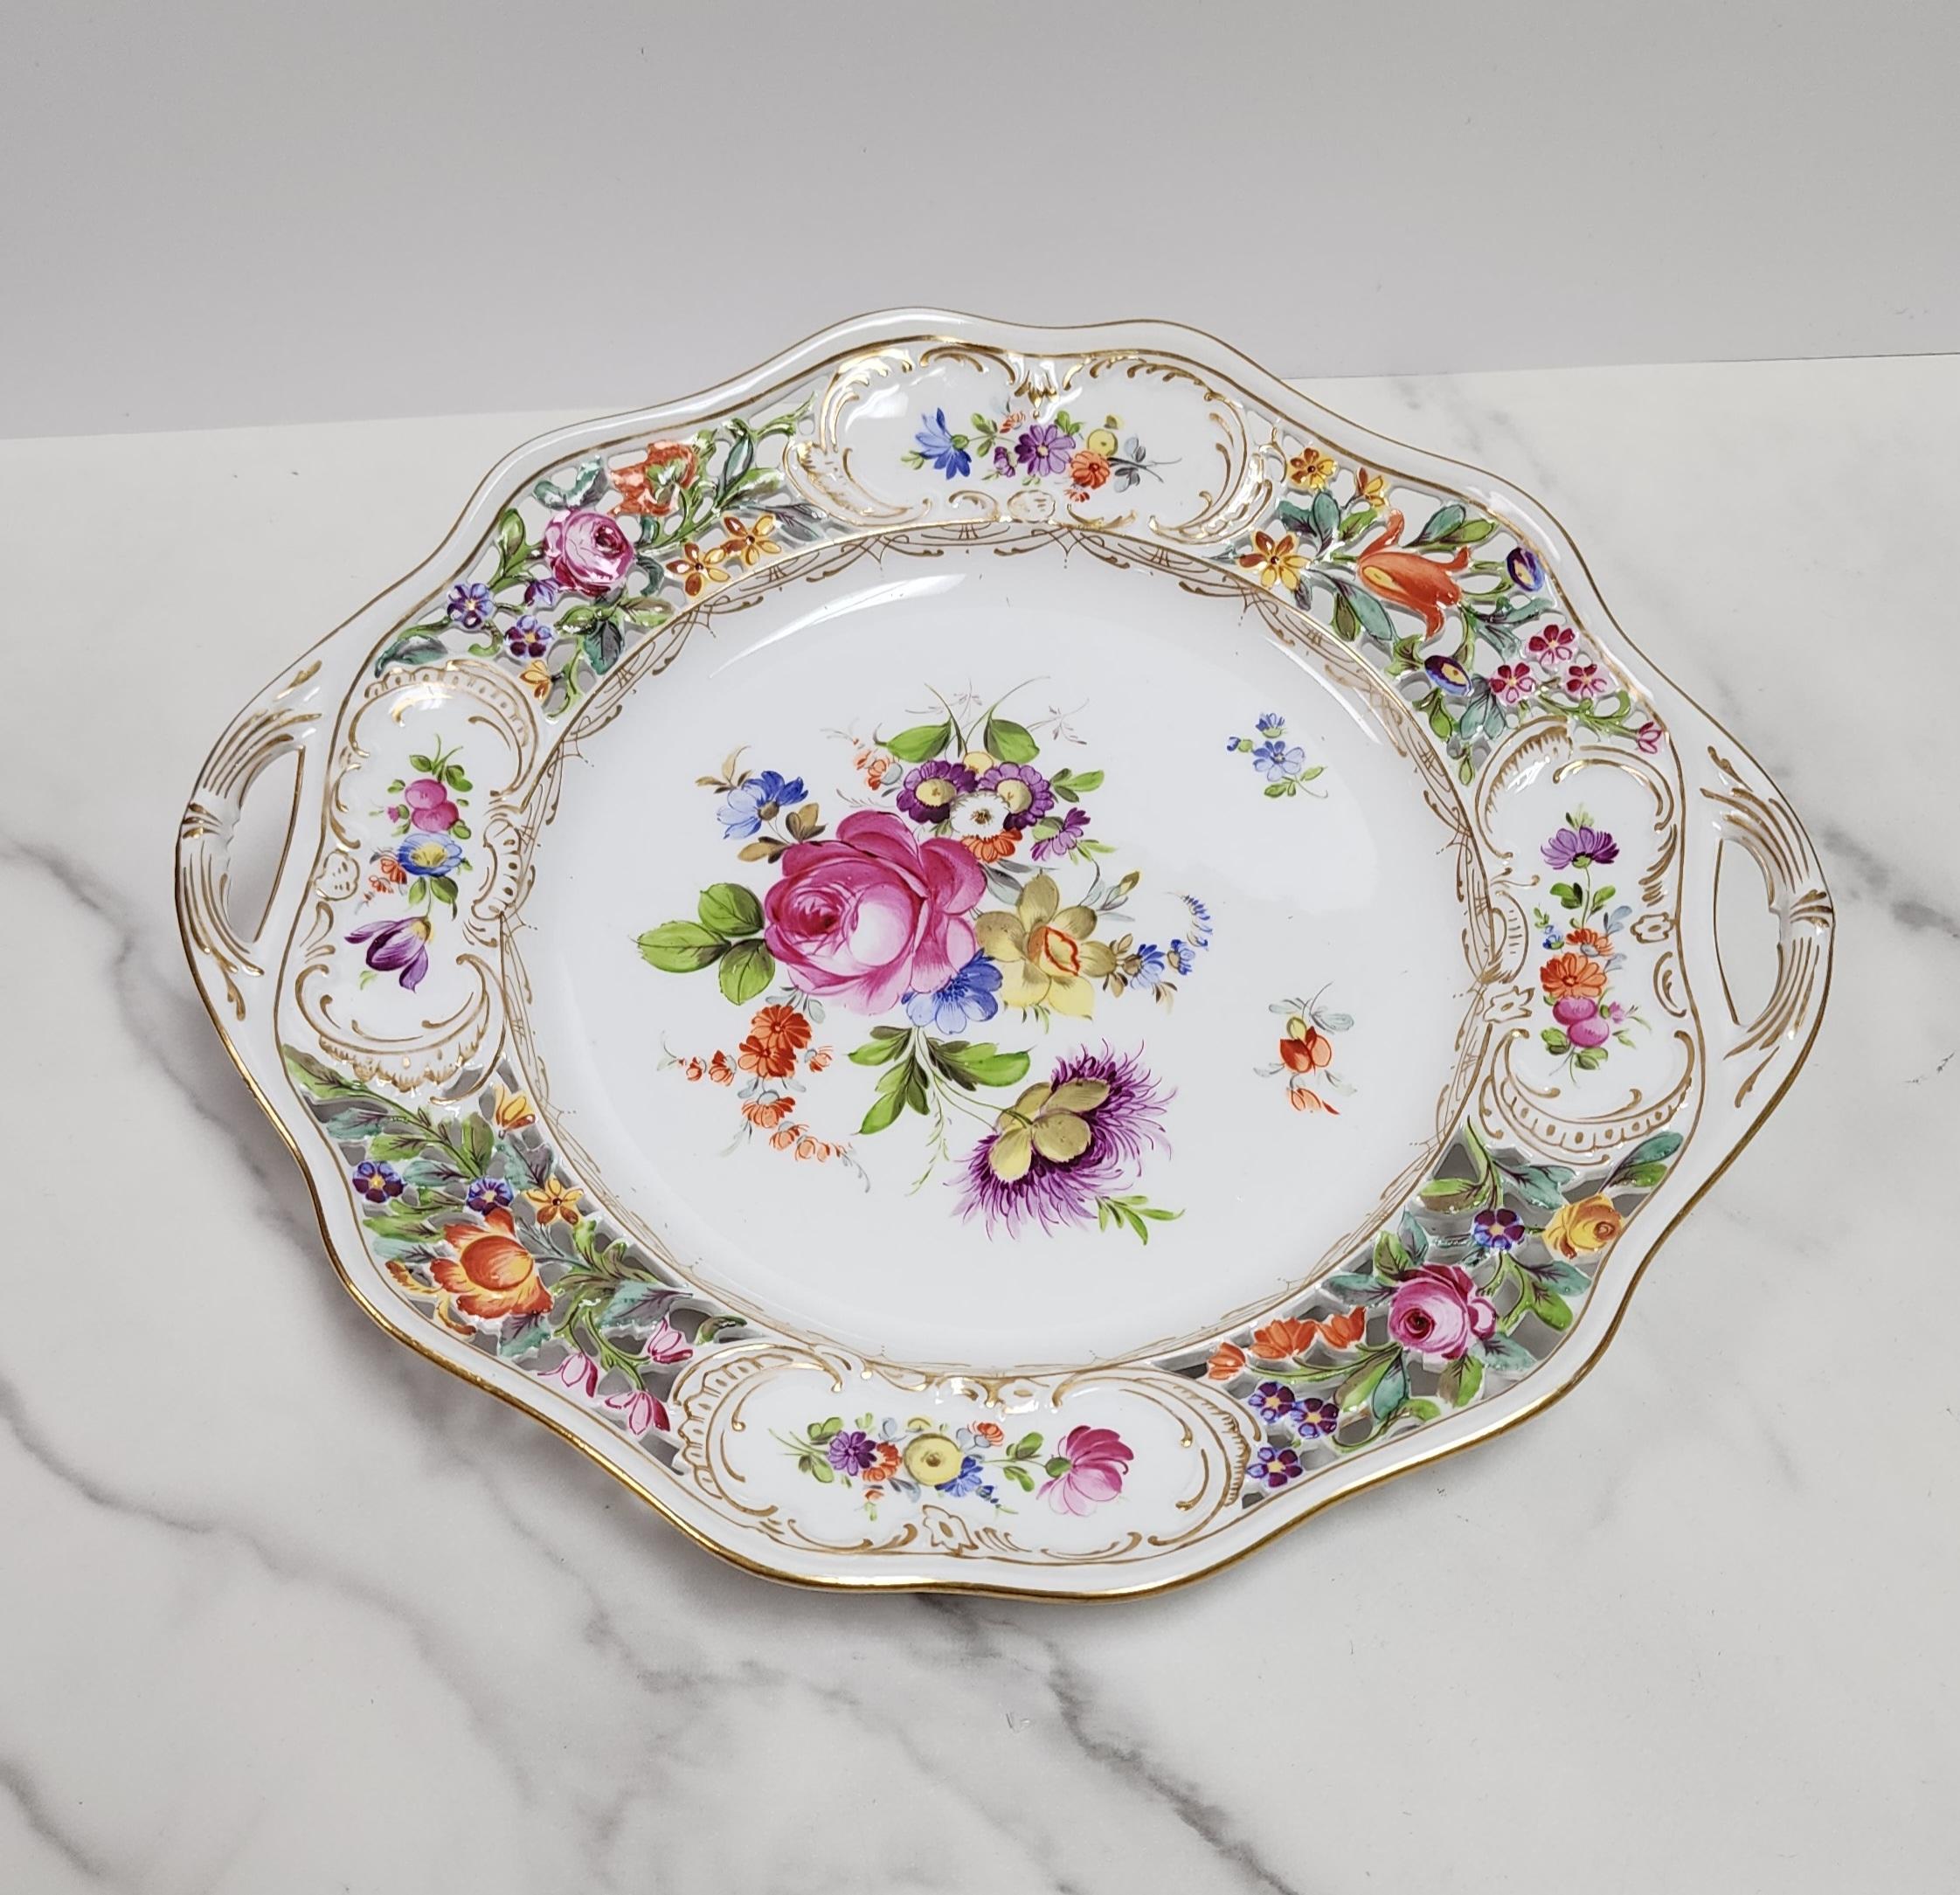 This beautiful antique porcelain cake plate is by Carl Thieme for Dresden China. The intricate reticulated cutouts at the handles are expertly done while the hand painted floral garden pattern is still bright and vibrant.
 
The Sächsische